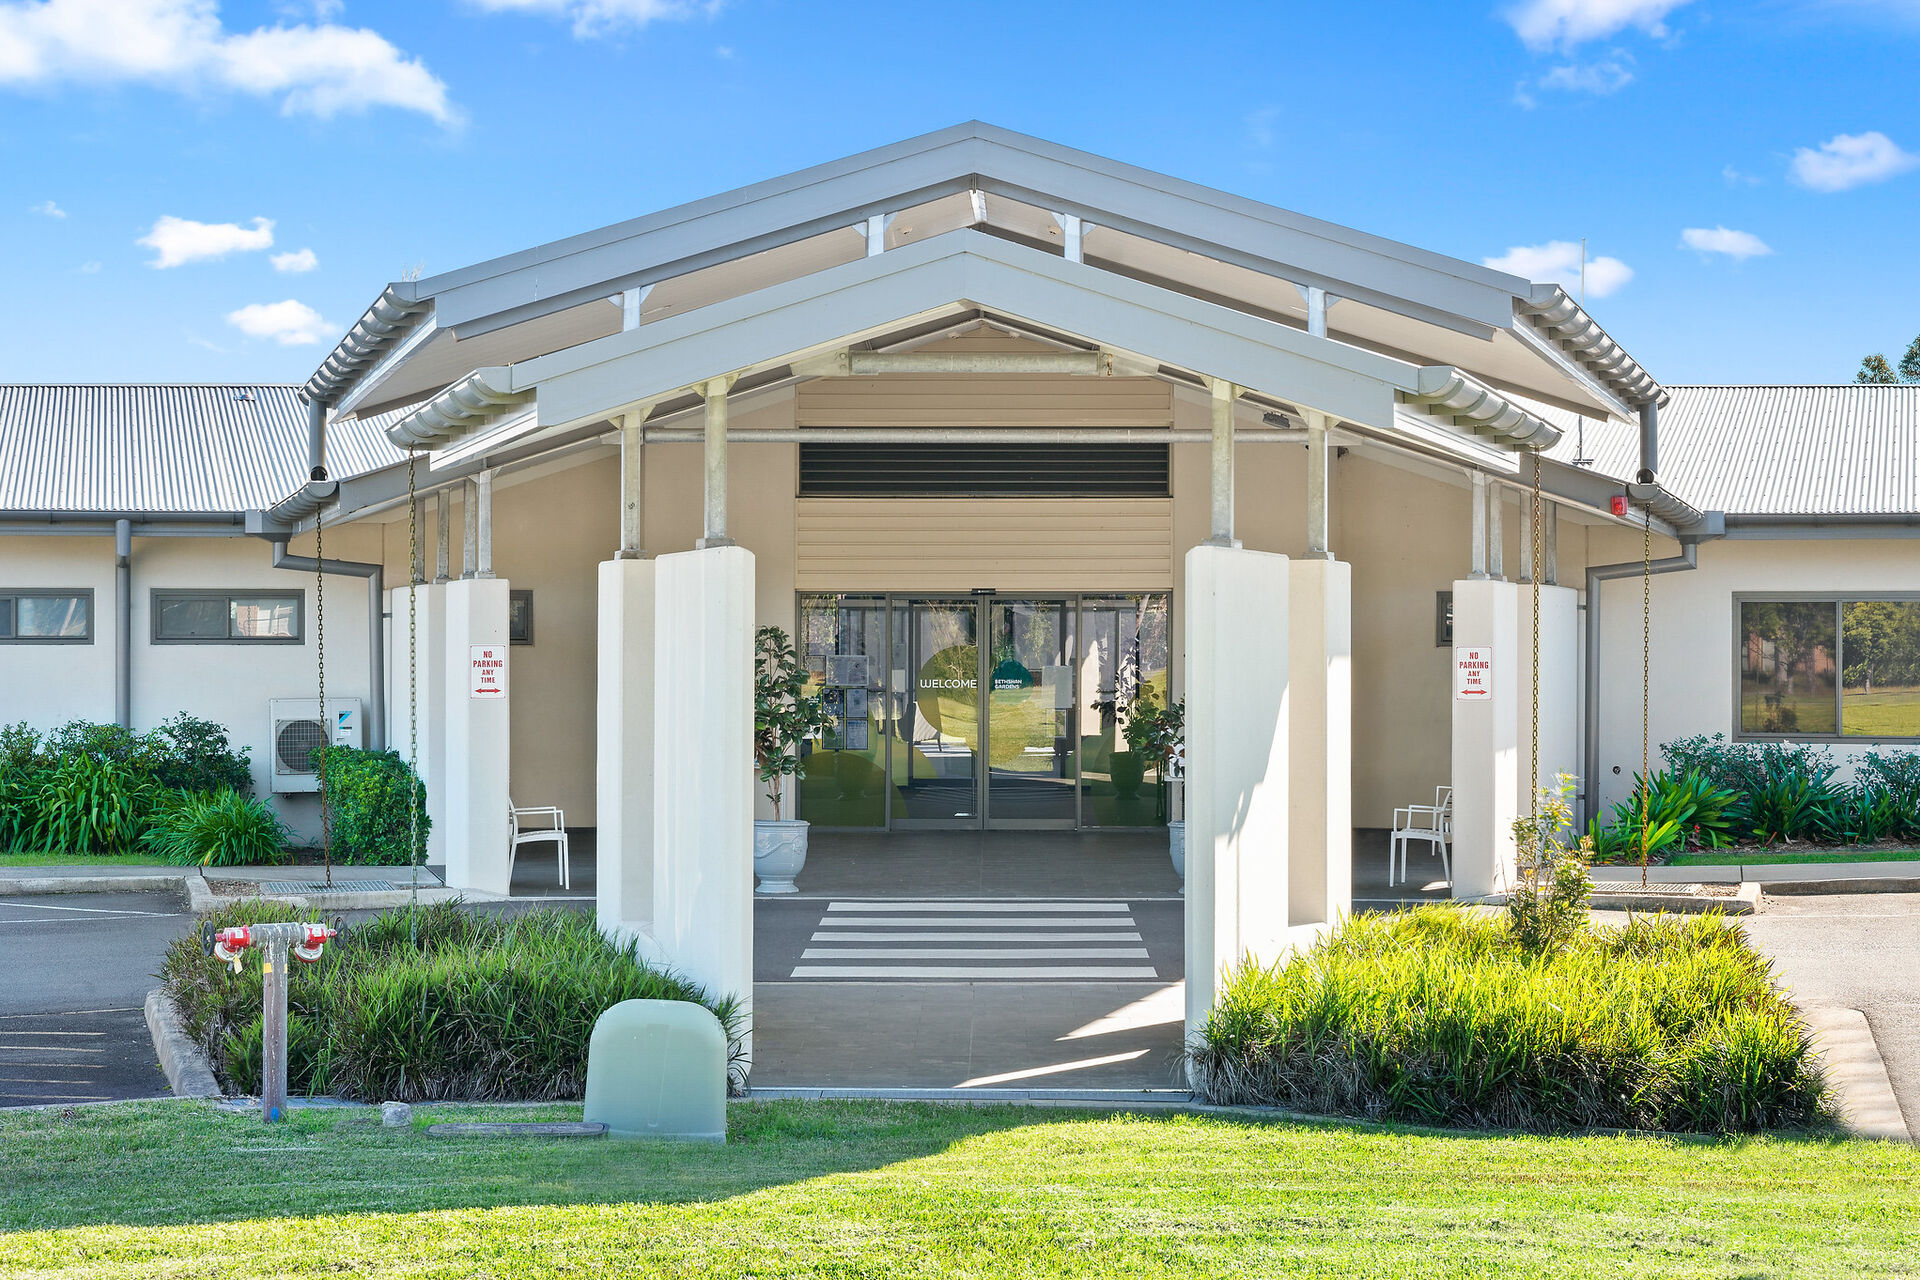 entry to baptistcare bethshan gardens centre aged care home in wyee nsw lake macquarie